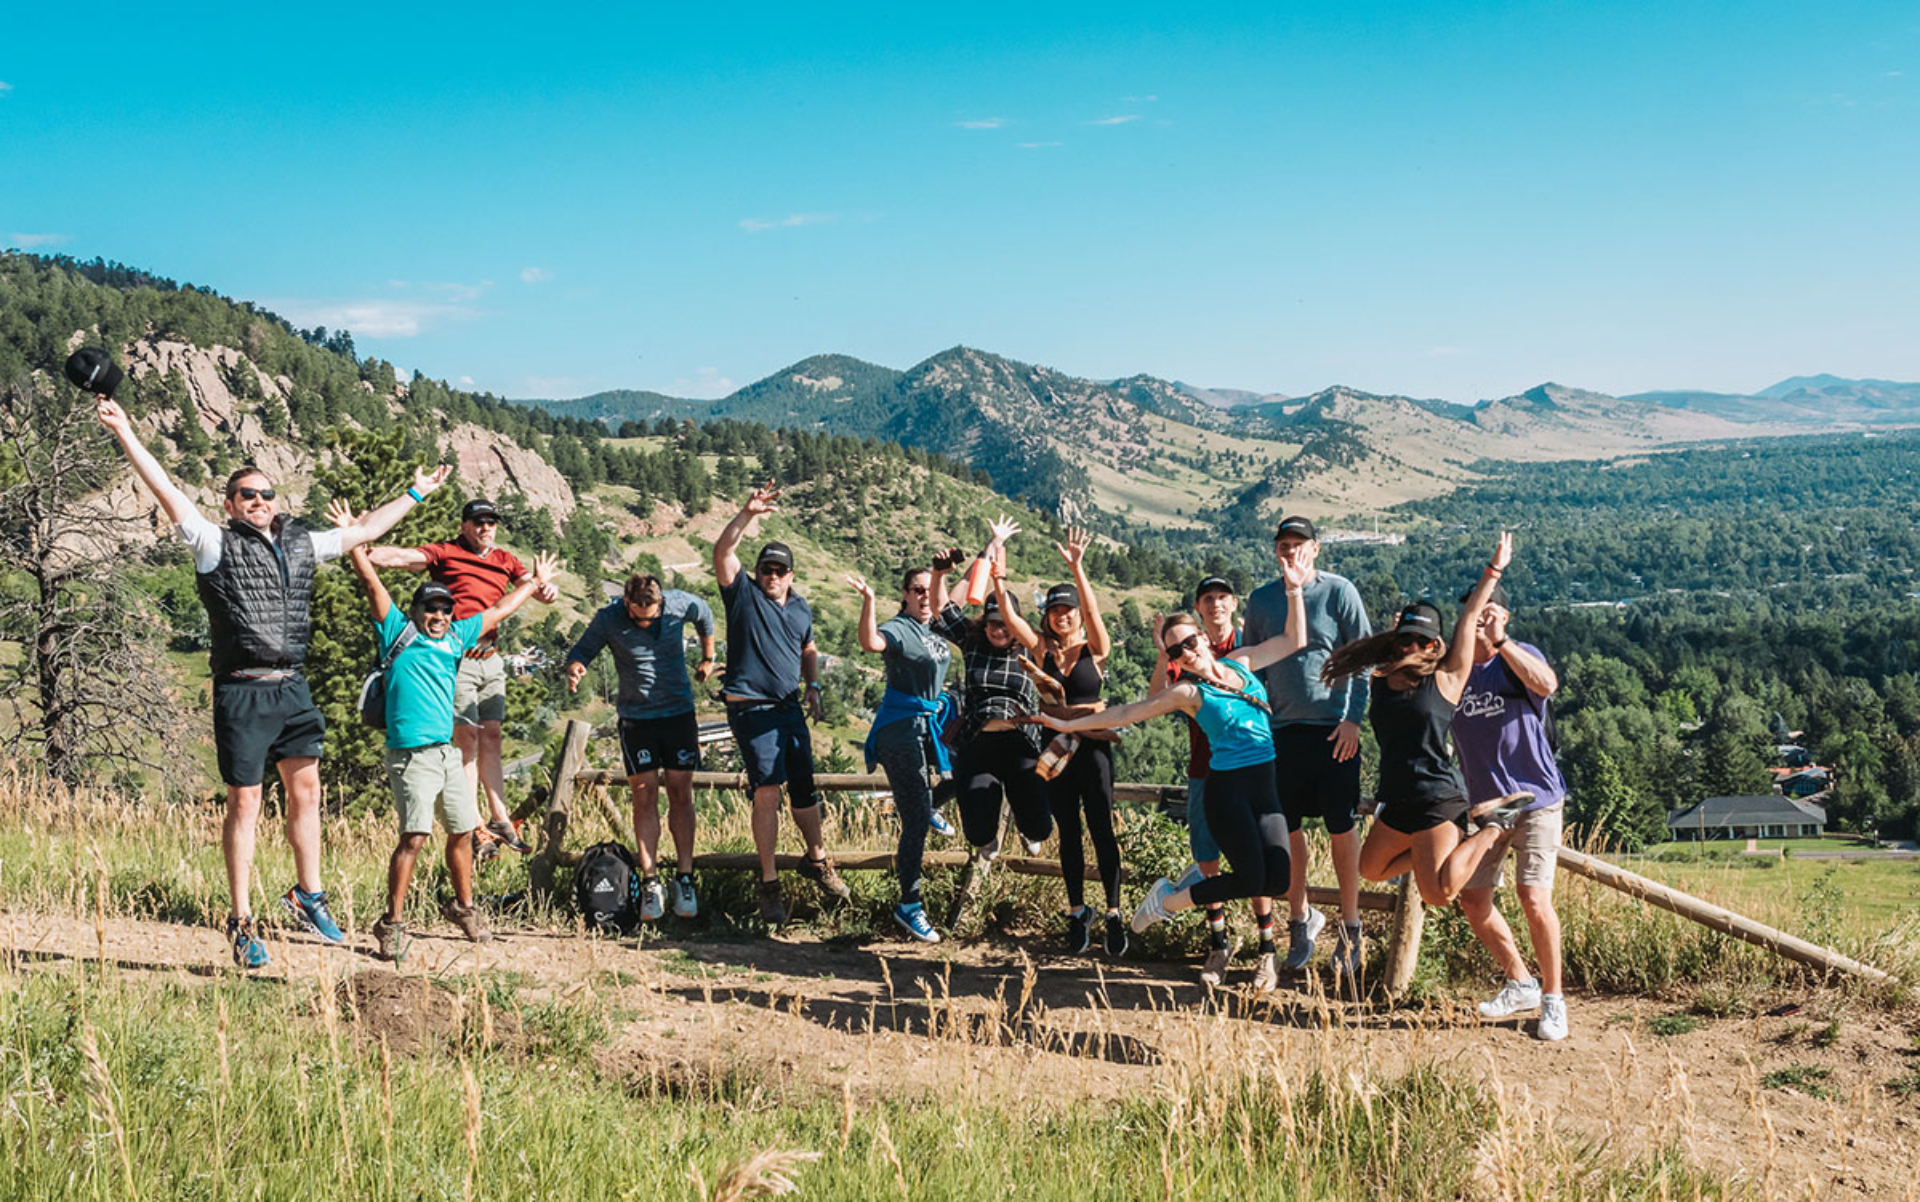 A group shot of the Loadsure team out on a hike in the mountains. Everyone is wearing hiking gear and jumping happily for the photo.